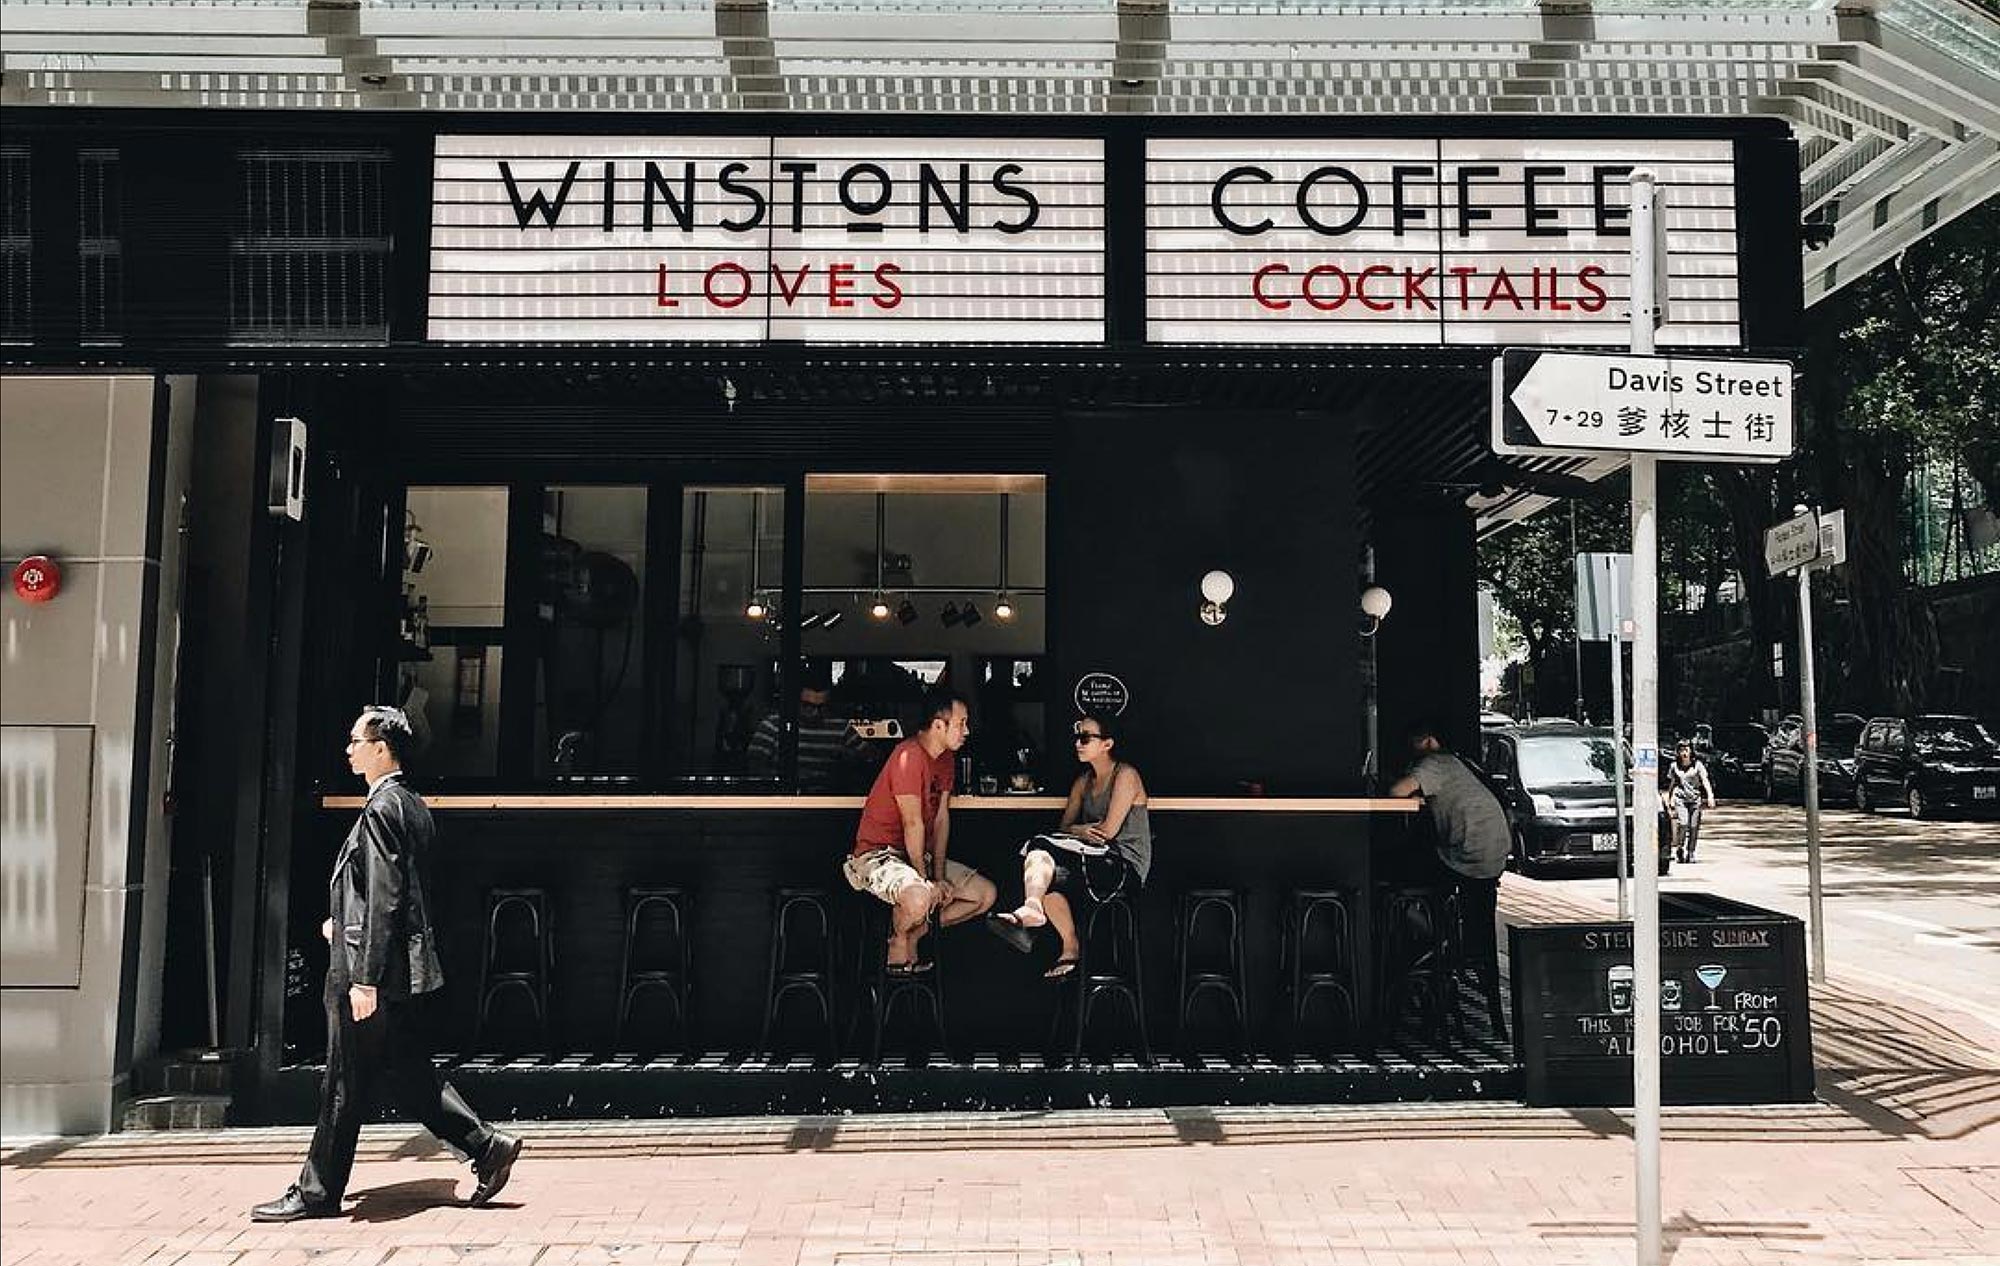 Exterior of Winstons coffee shop in Hong Kong